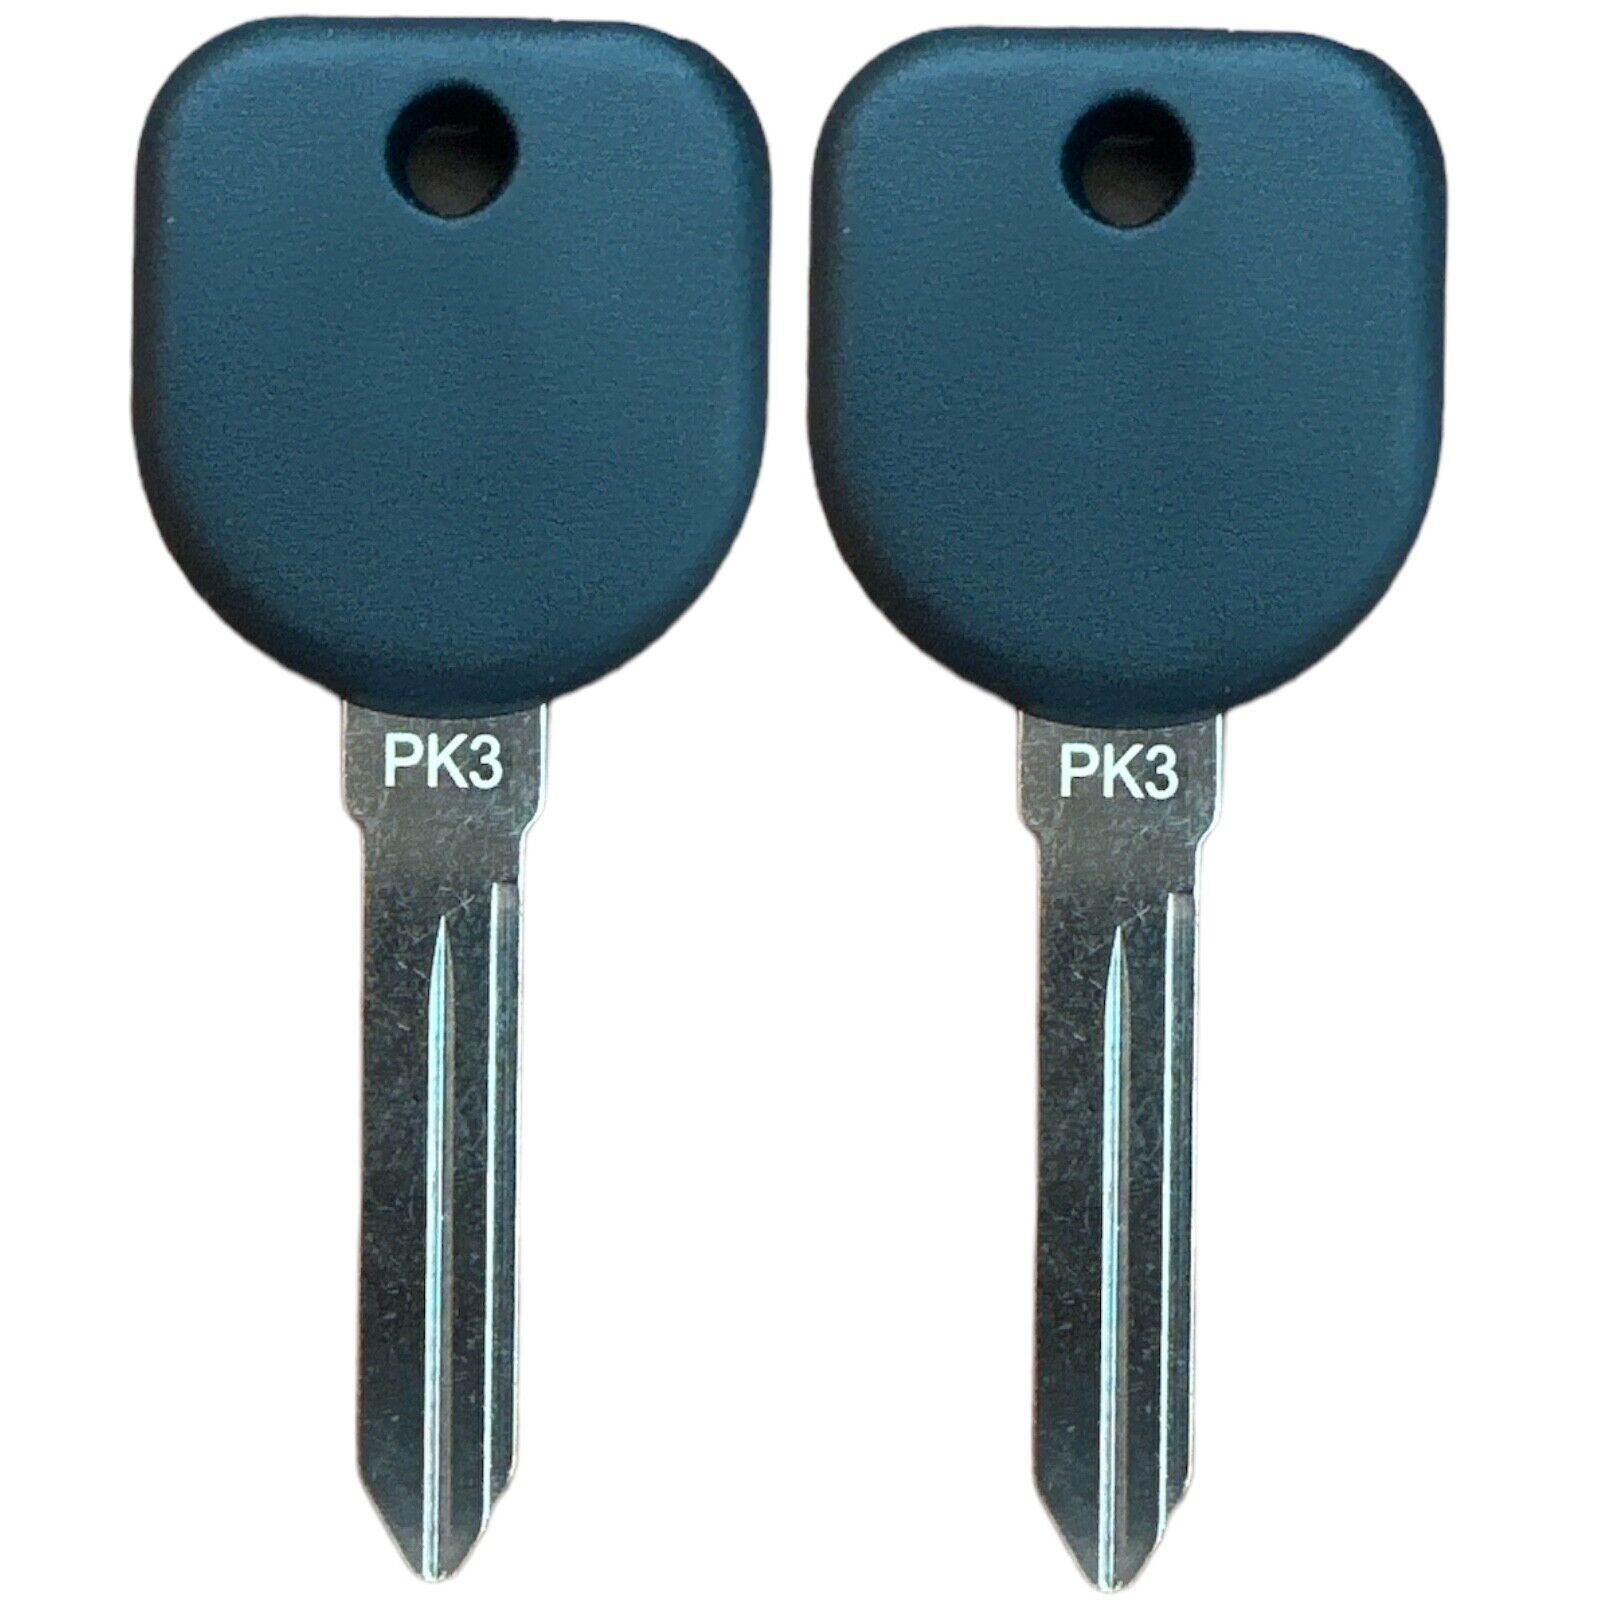 New Uncut Blank Chipped Transponder key Replacement for GM PK3+ B99 (2 Pack)